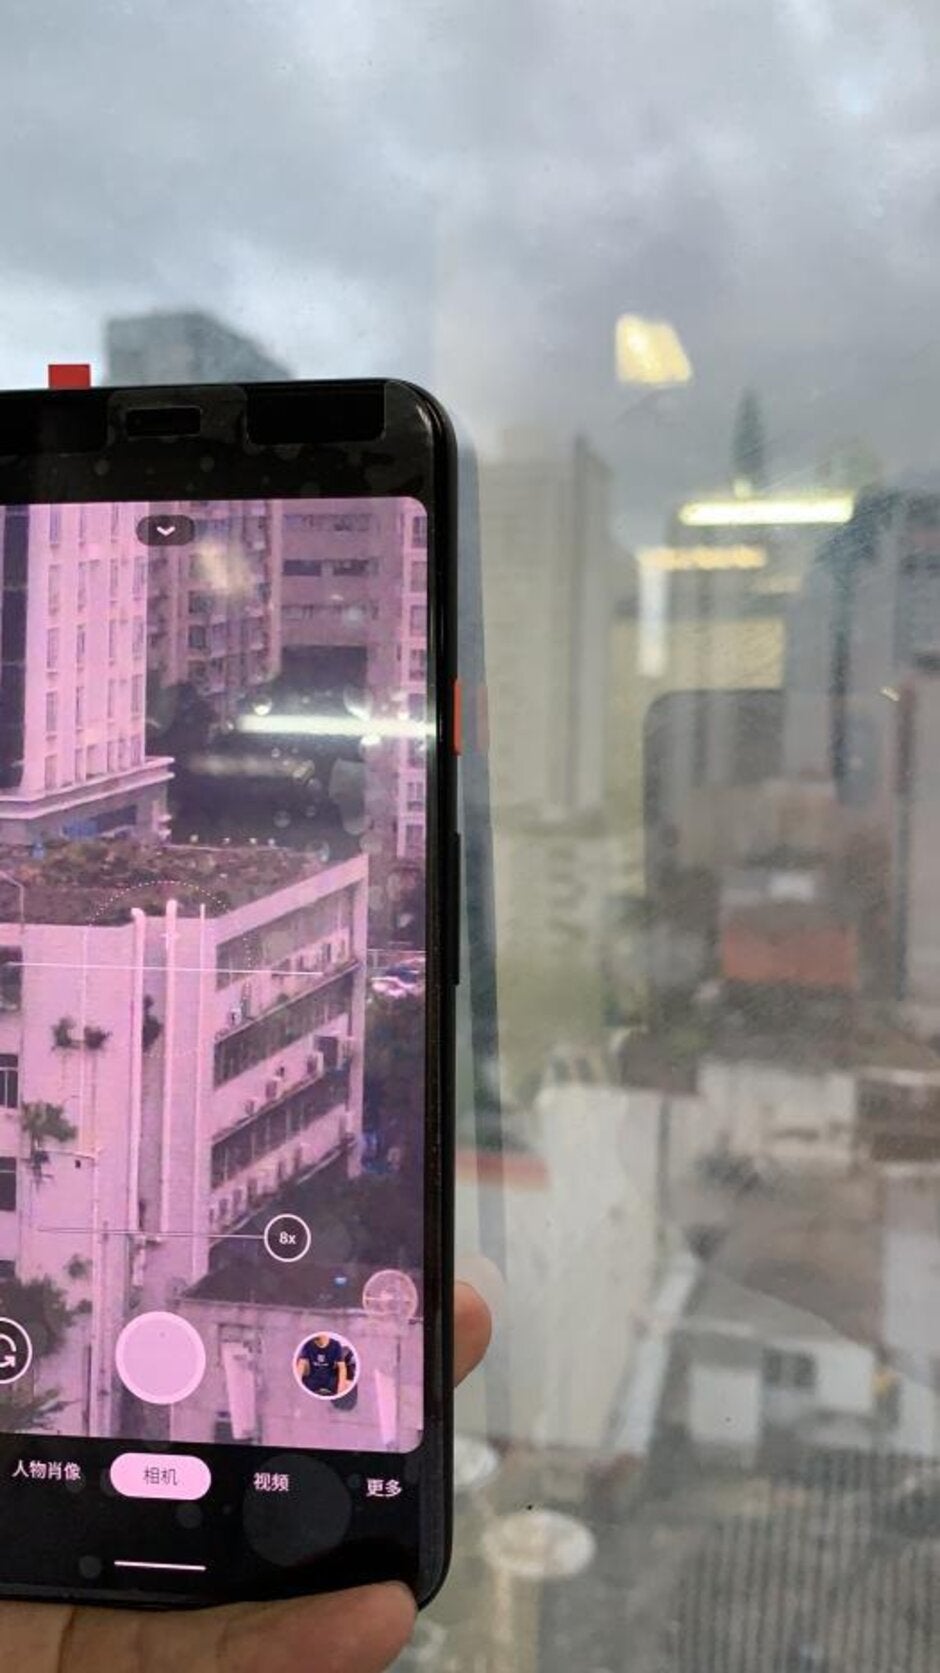 Photo of Pixel 4's camera app shows 8x zoom - Pixel 4 camera to have improved Night Sight, 8x zoom and a new Motion Mode feature